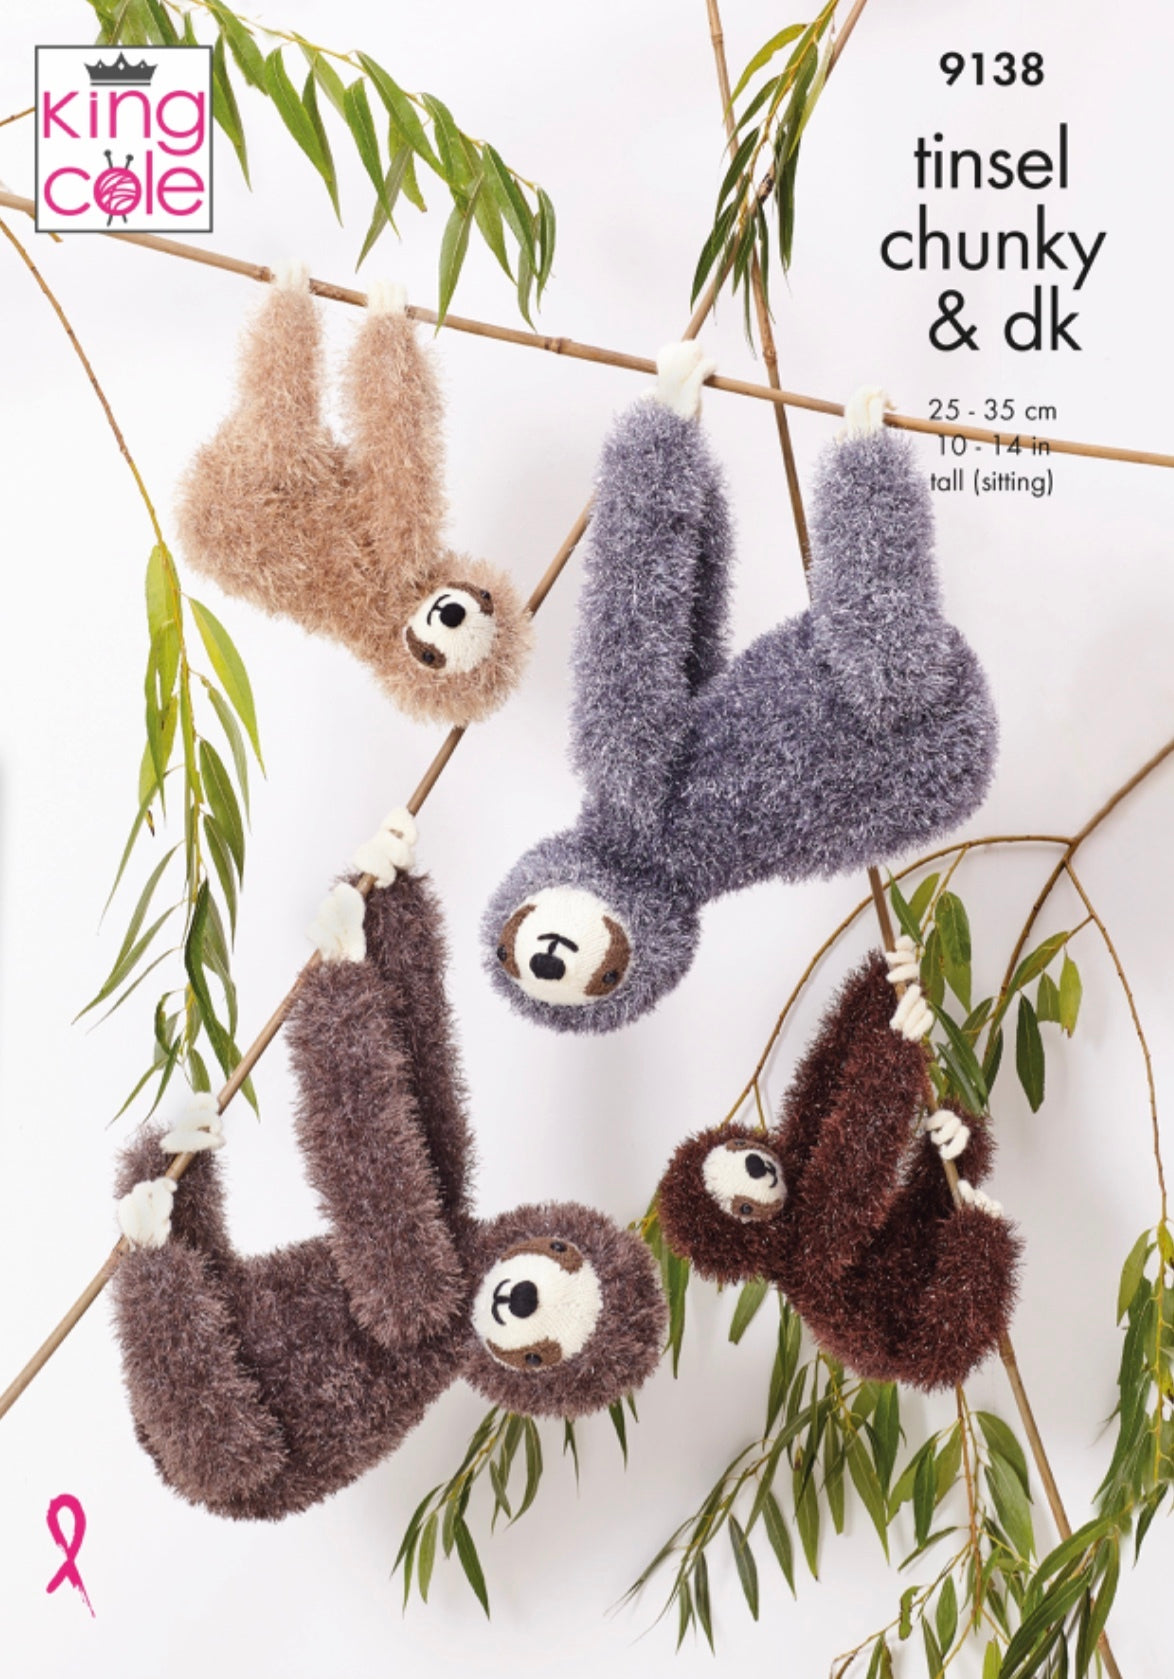 King Cole Pattern 9138 Sloths in Tinsel Chunky & DK